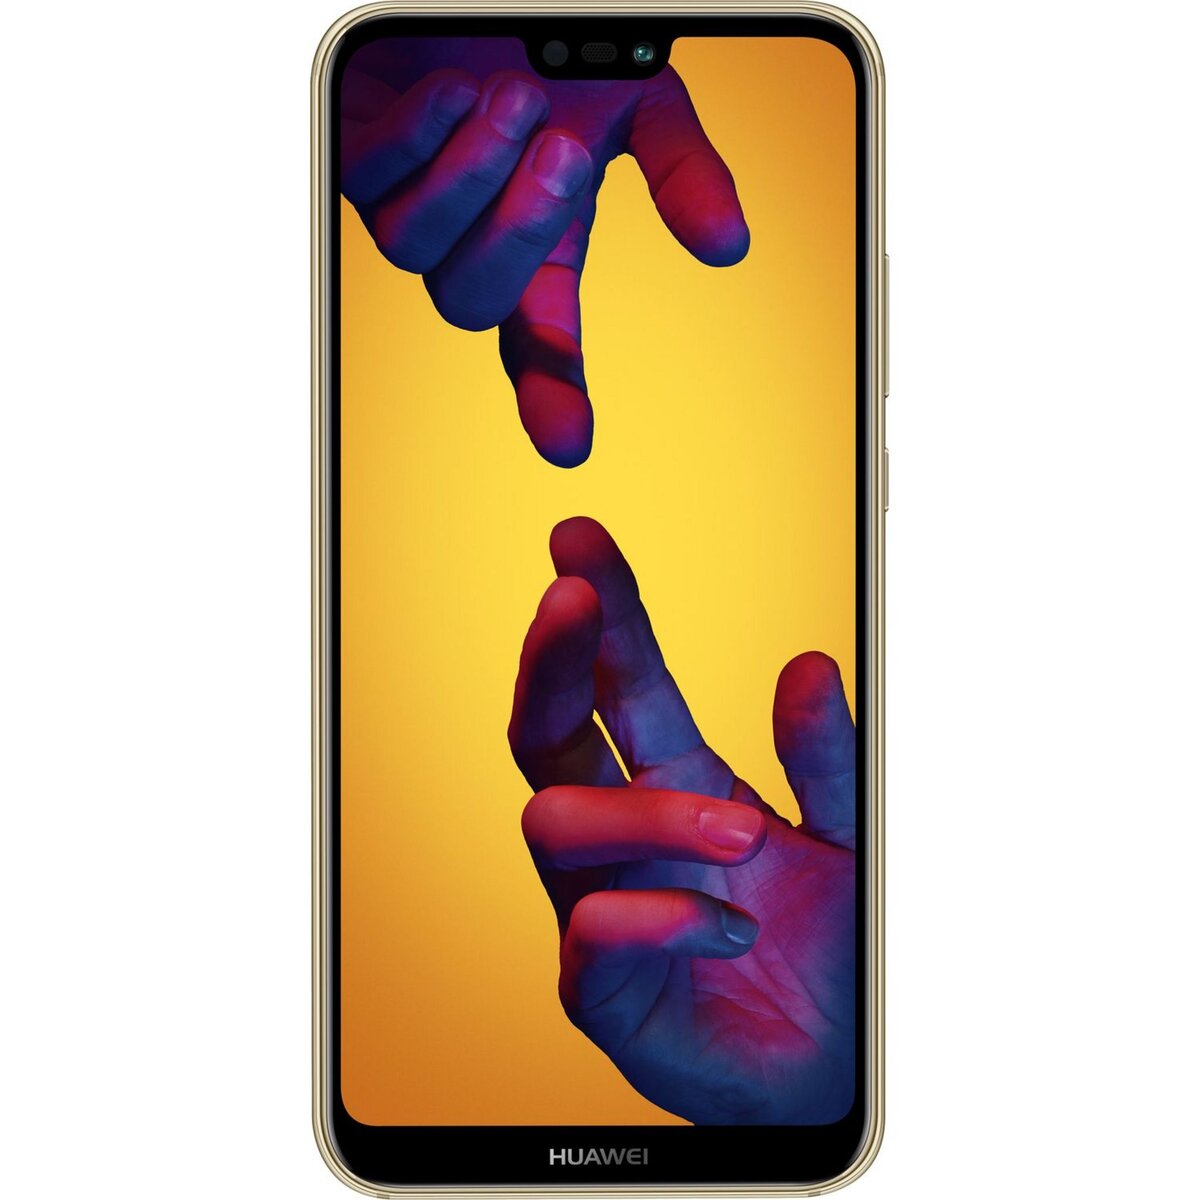 HUAWEI Smartphone - P20 Lite - 64 Go - 5.84 pouces - Or - Double Sim - 4 G+